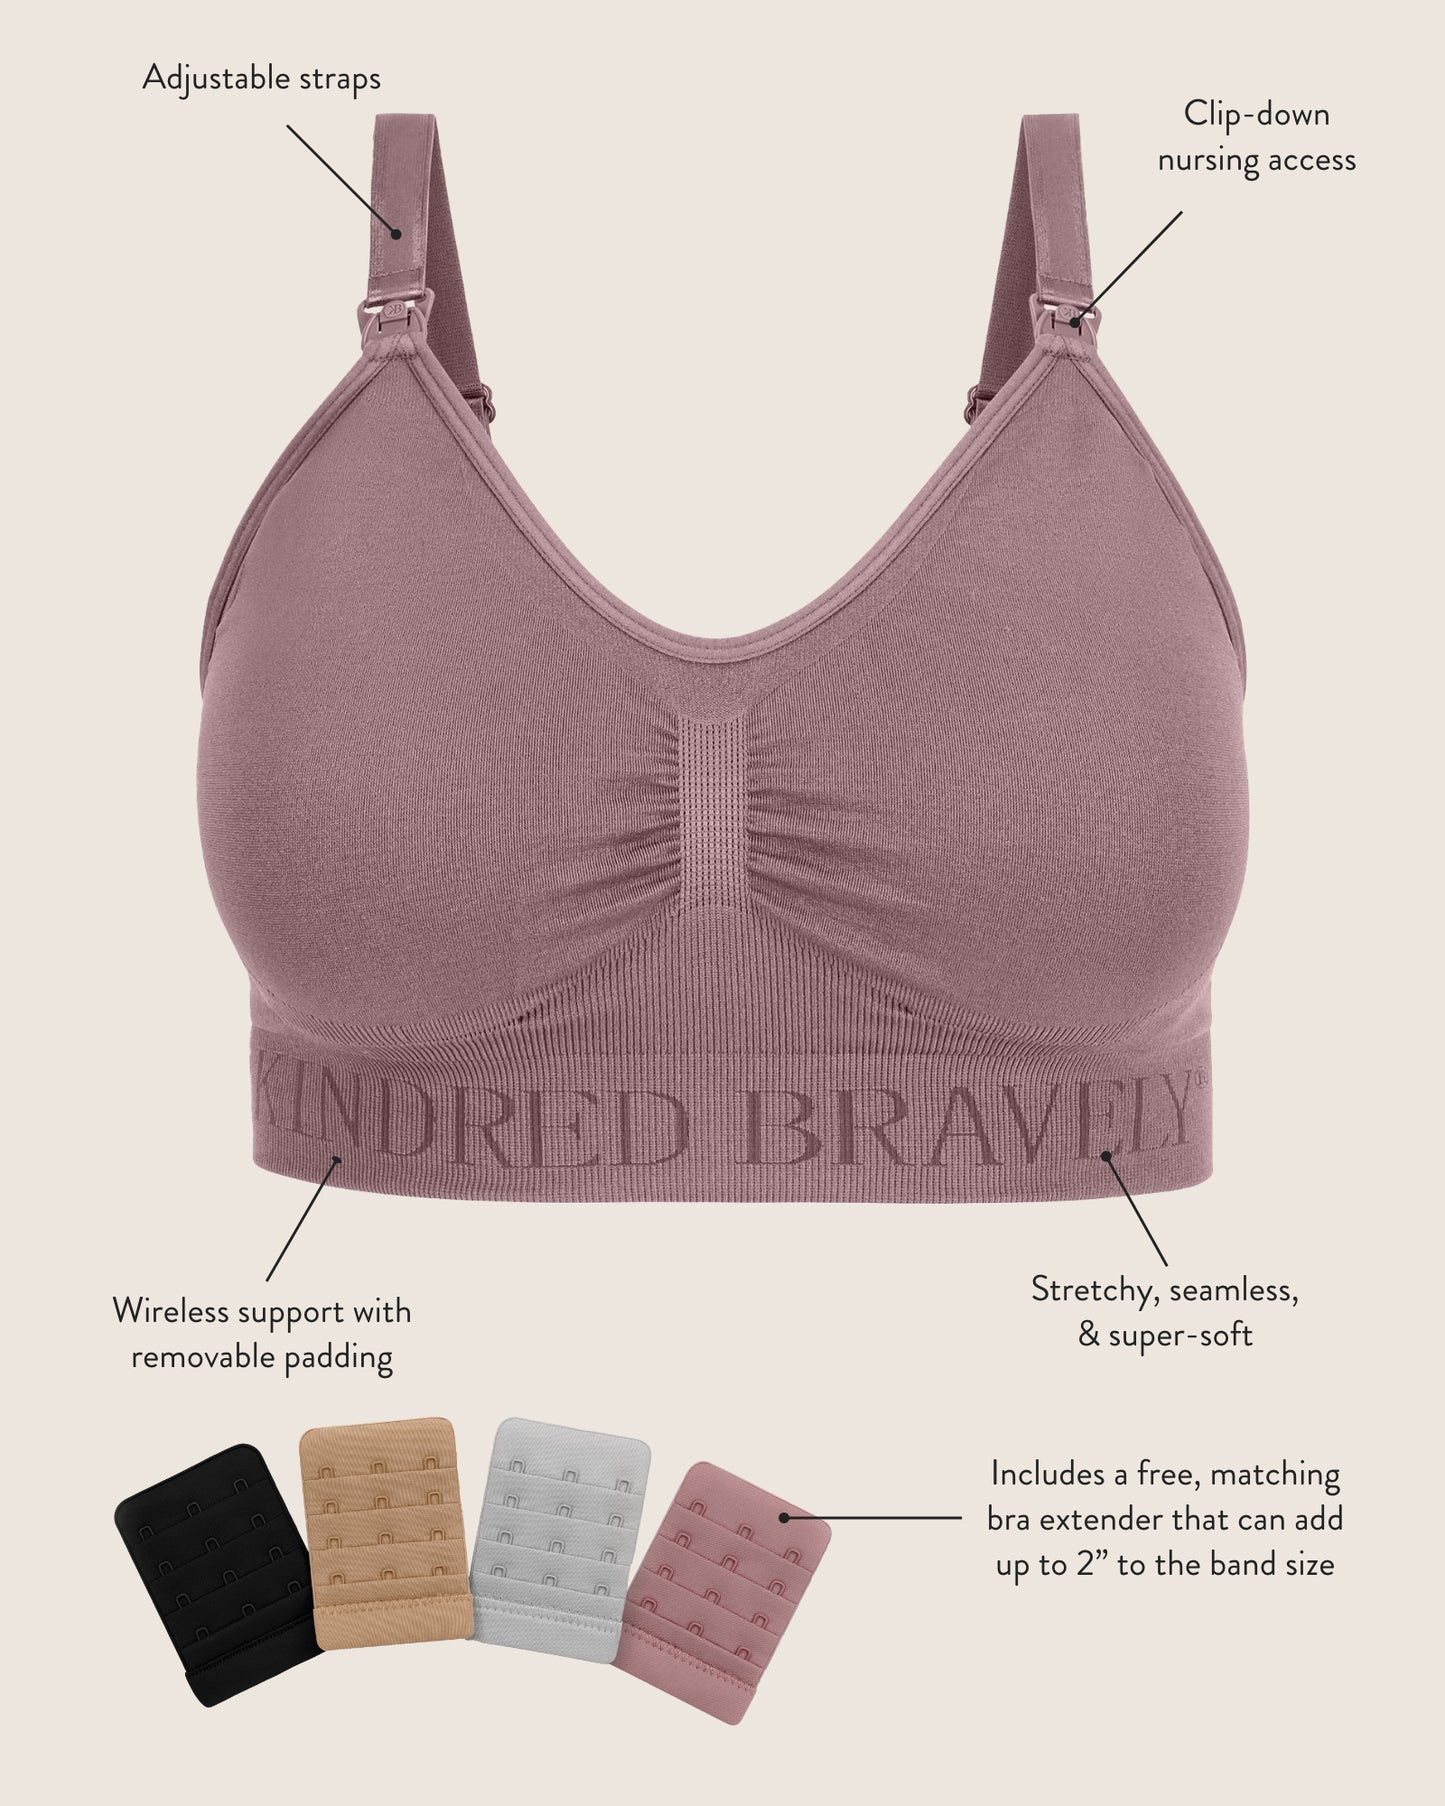 Infographic explaining the benefits of the Sublime Nursing Bra. It has adjustable straps, Clip-down nursing access, wireless support with removable padding and a stretchy, seamless and it is super-soft. 